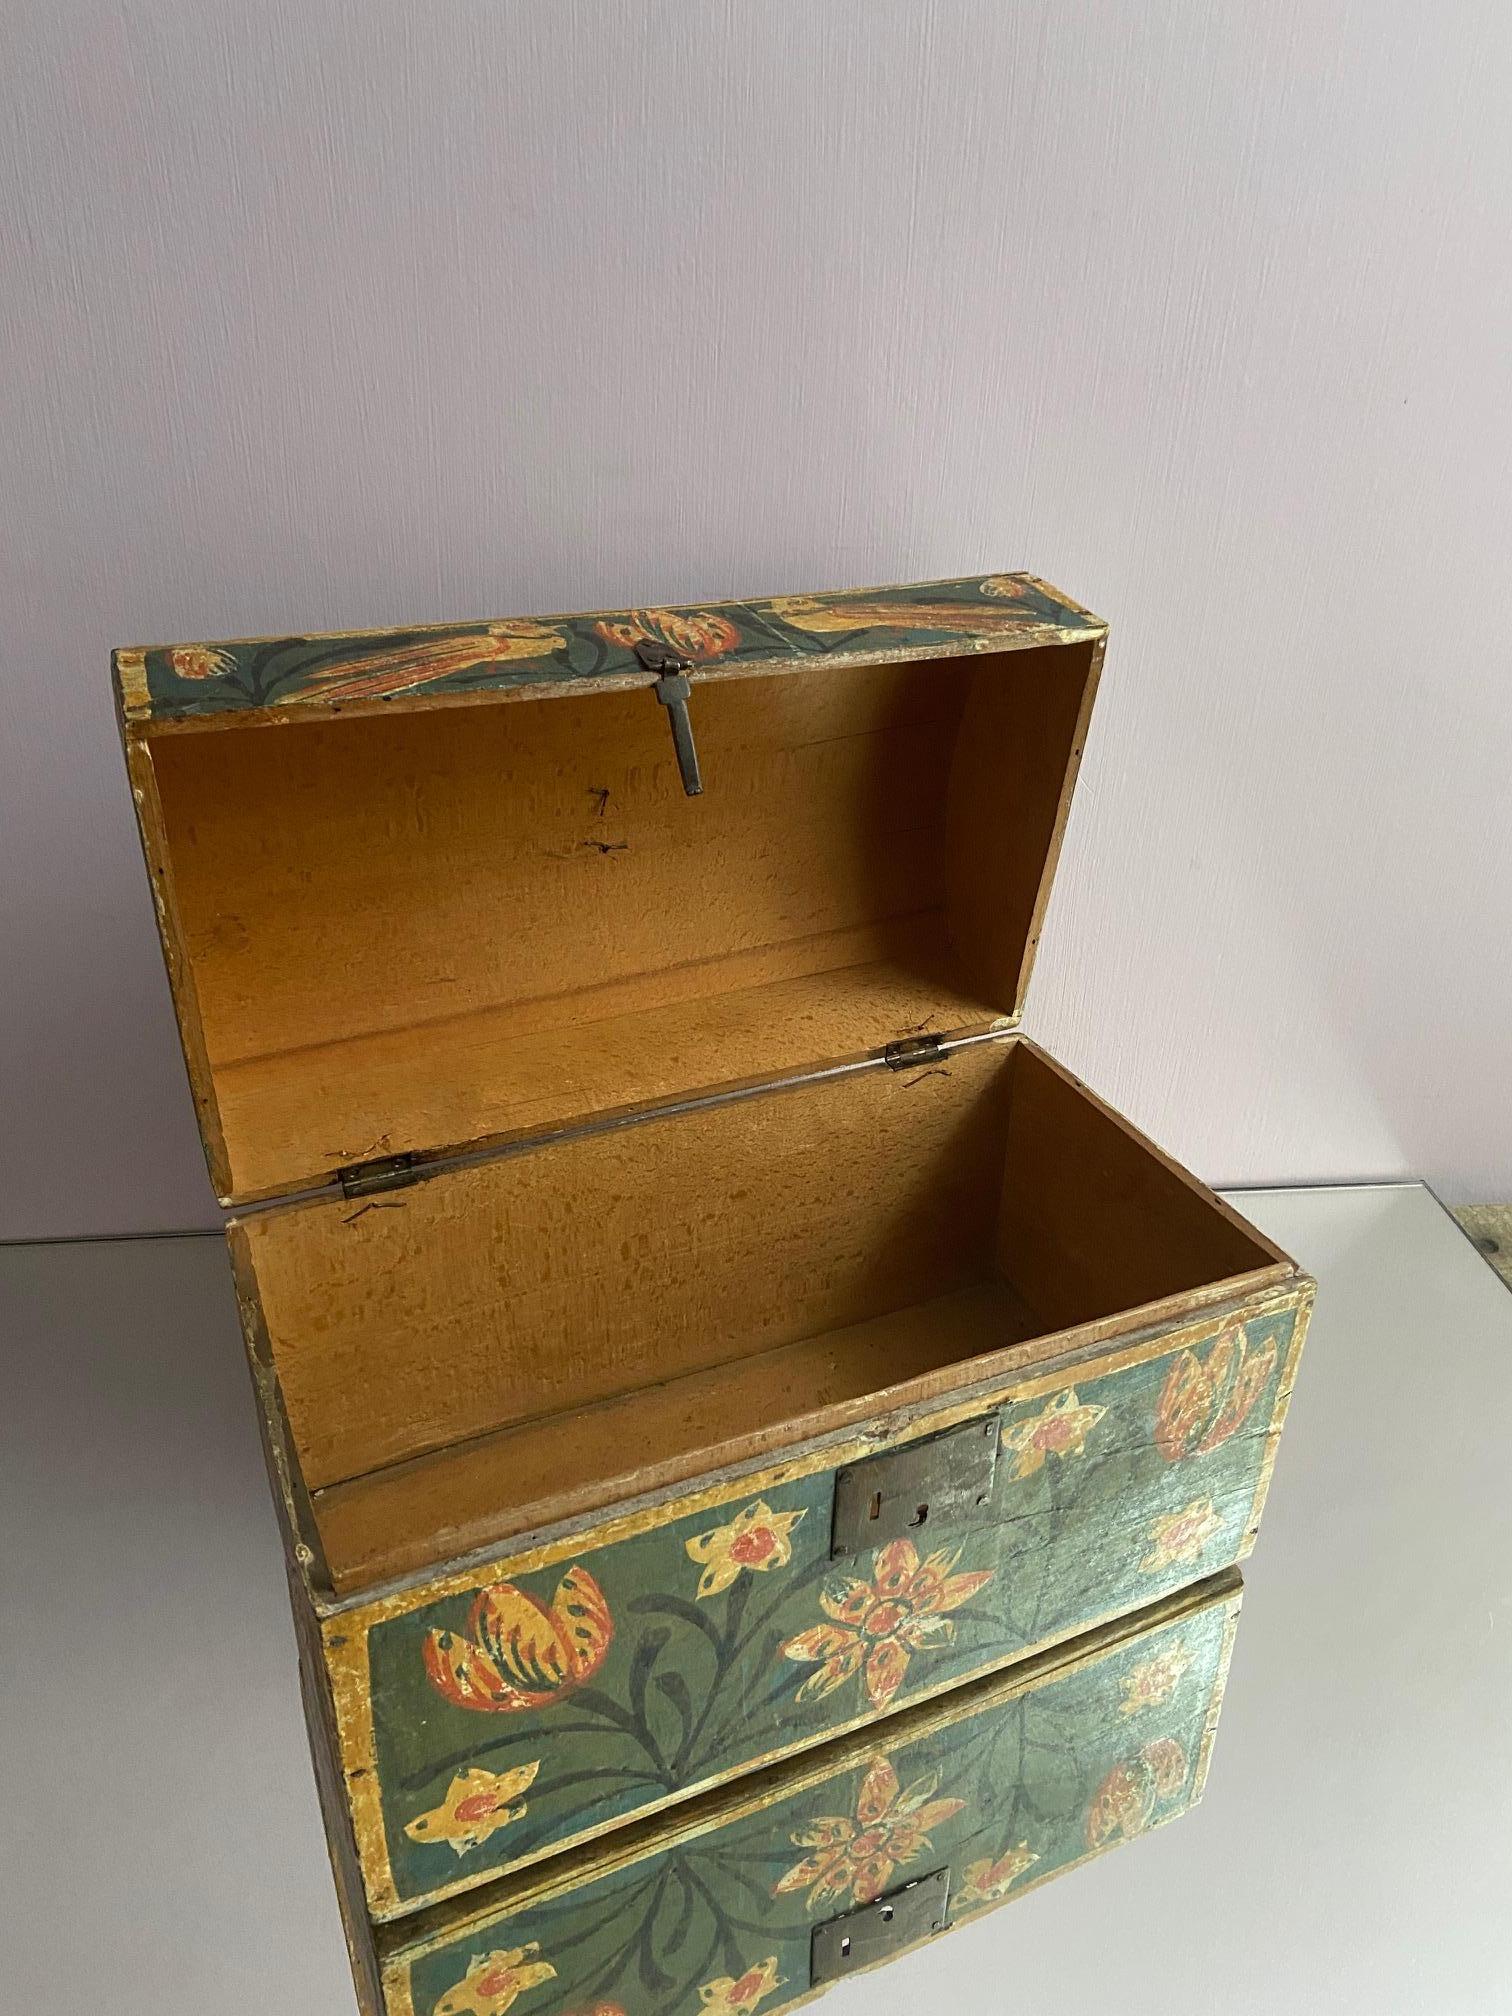 Hand-Painted Vintage Wooden Wedding Chest with Hand Painted Flowers, France, 19th Century